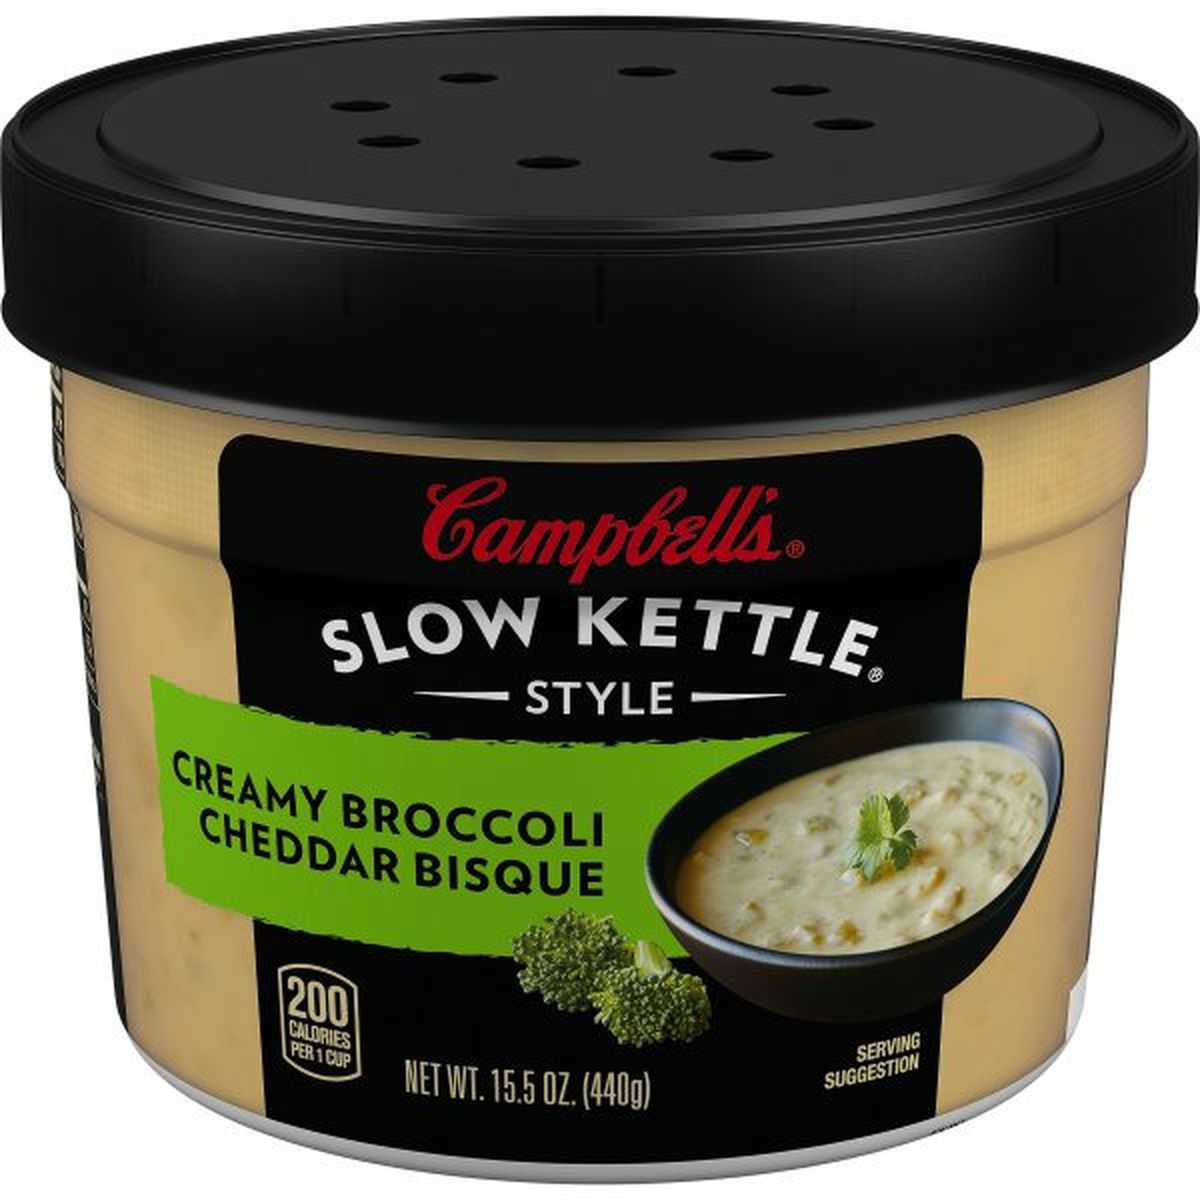 Calories in Campbell'ss Slow Kettles Slow Kettle Creamy Broccoli Cheddar Bisque